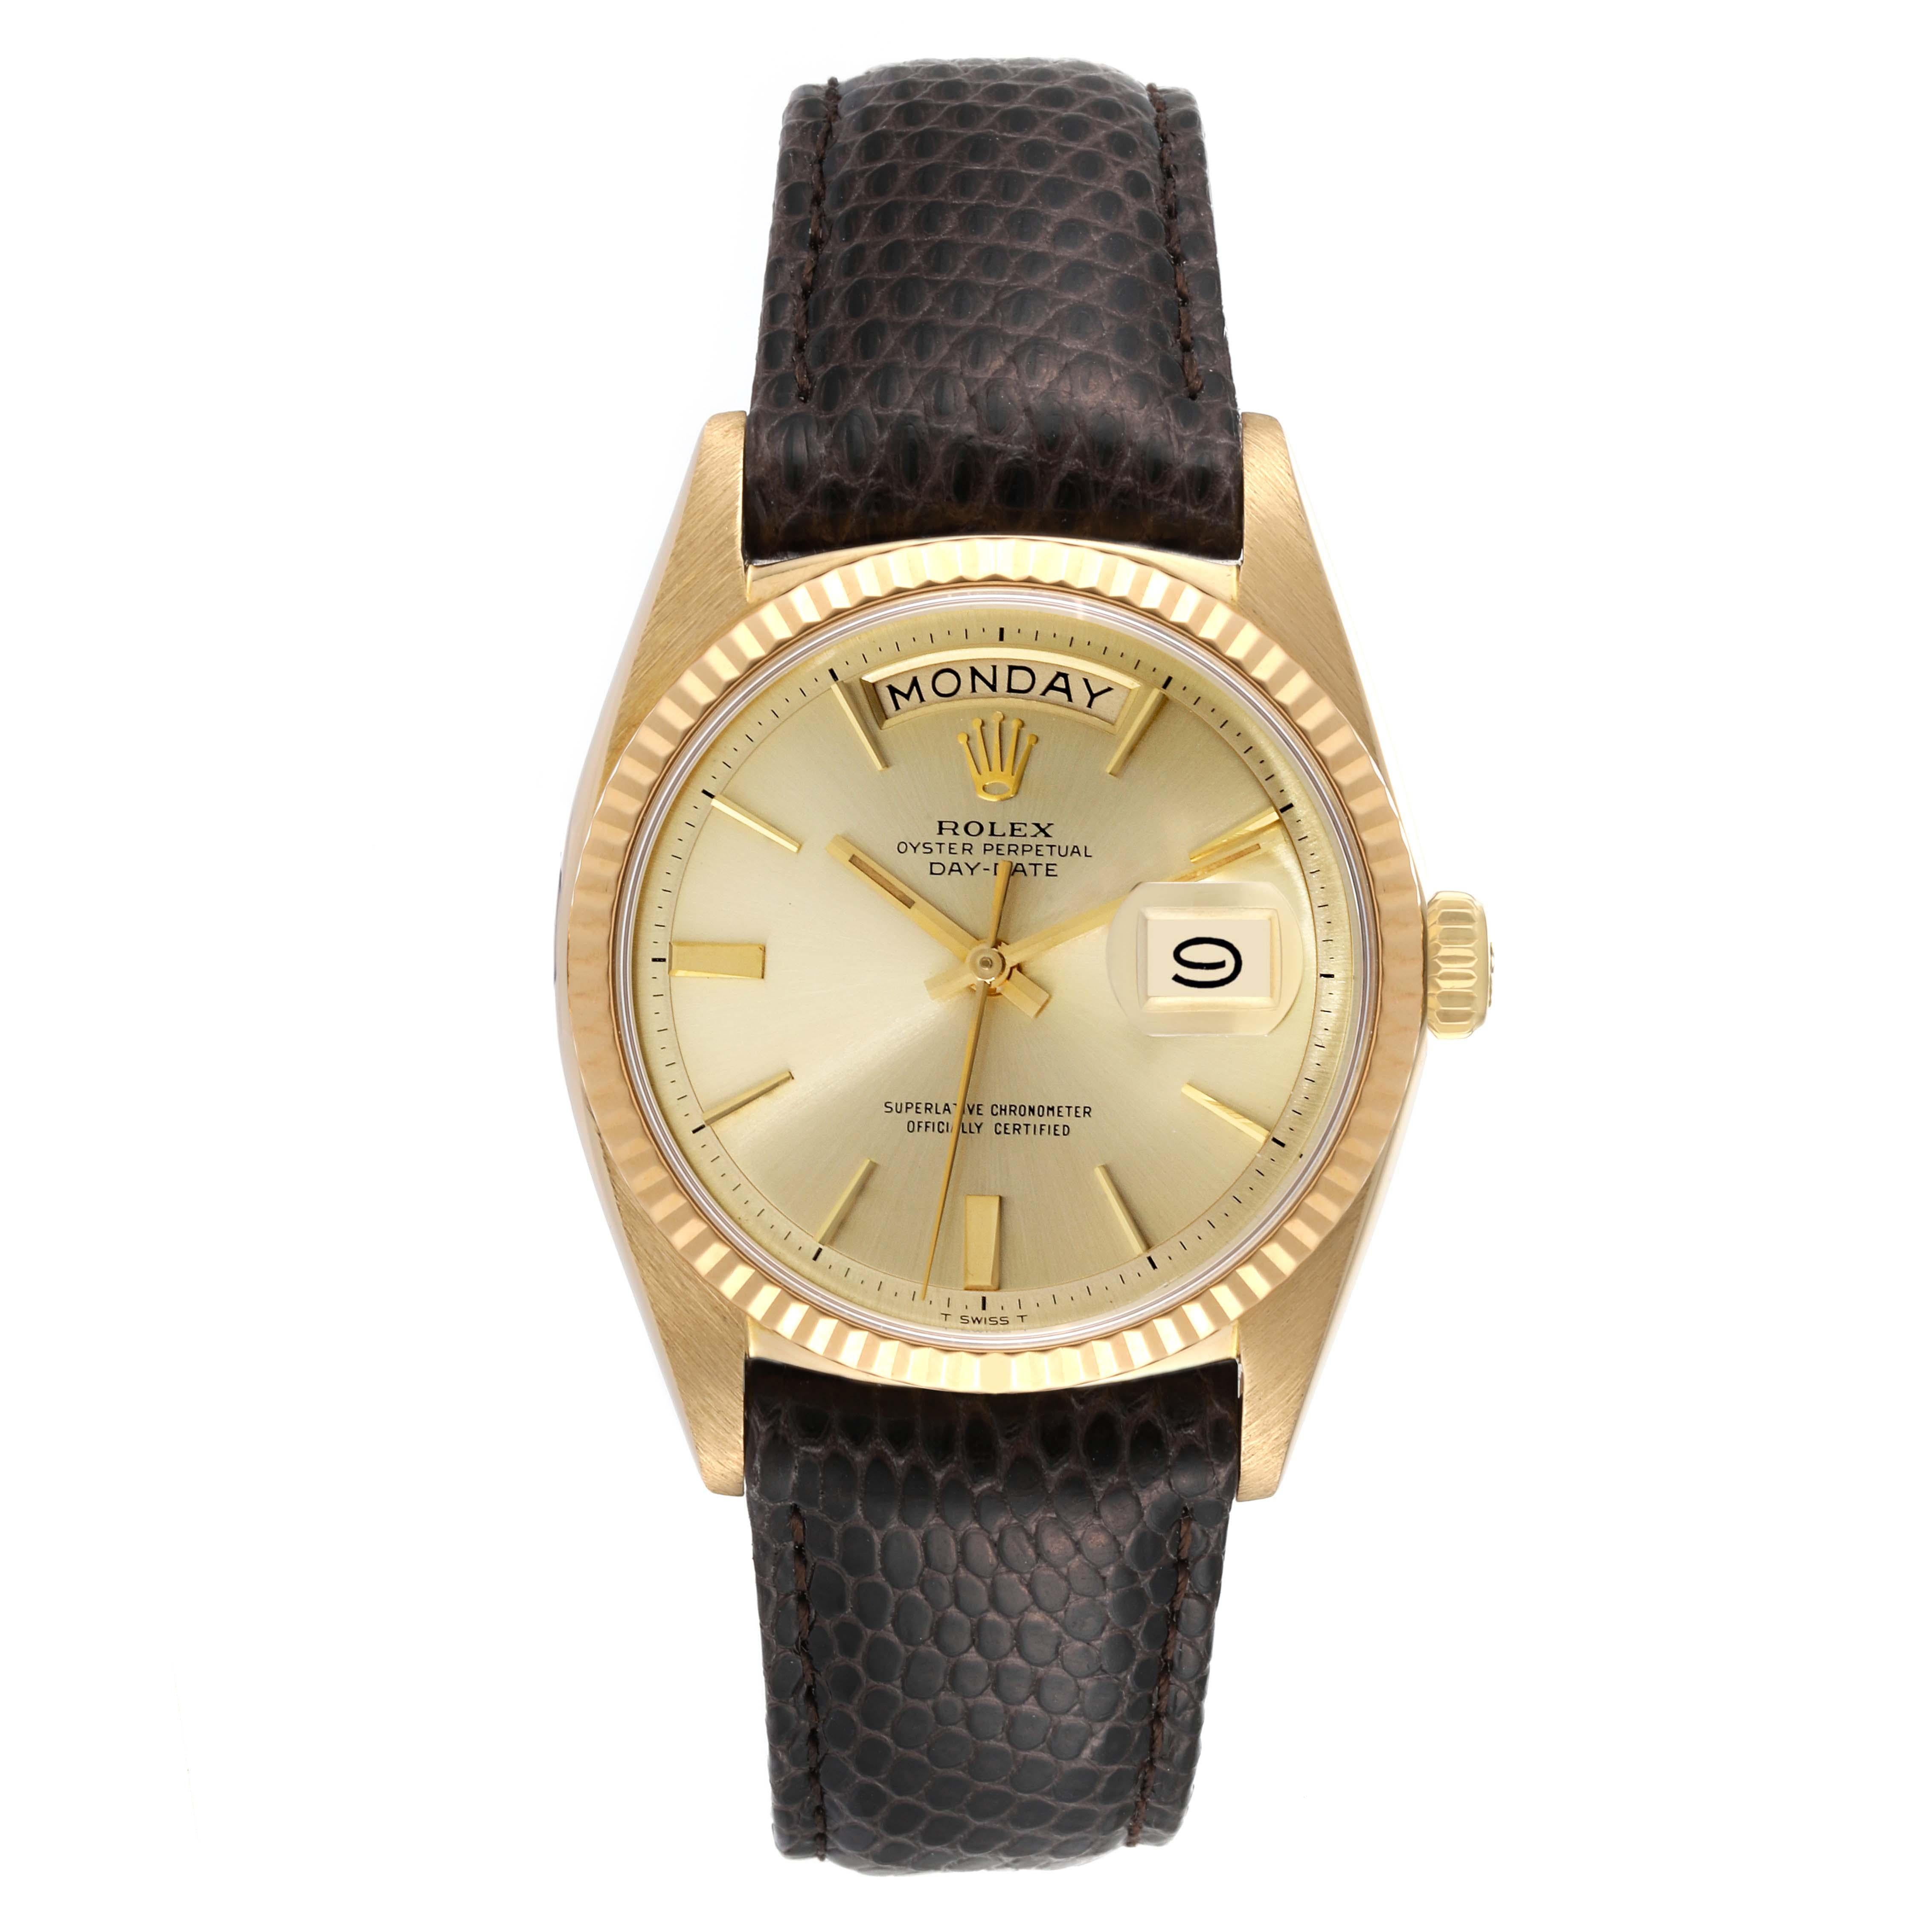 Rolex President Day-Date 36mm Yellow Gold Leather Strap Vintage Mens Watch 1803. Officially certified chronometer automatic self-winding movement. 18k yellow gold oyster case 36.0 mm in diameter. Rolex logo on a crown. 18k yellow gold fluted bezel.